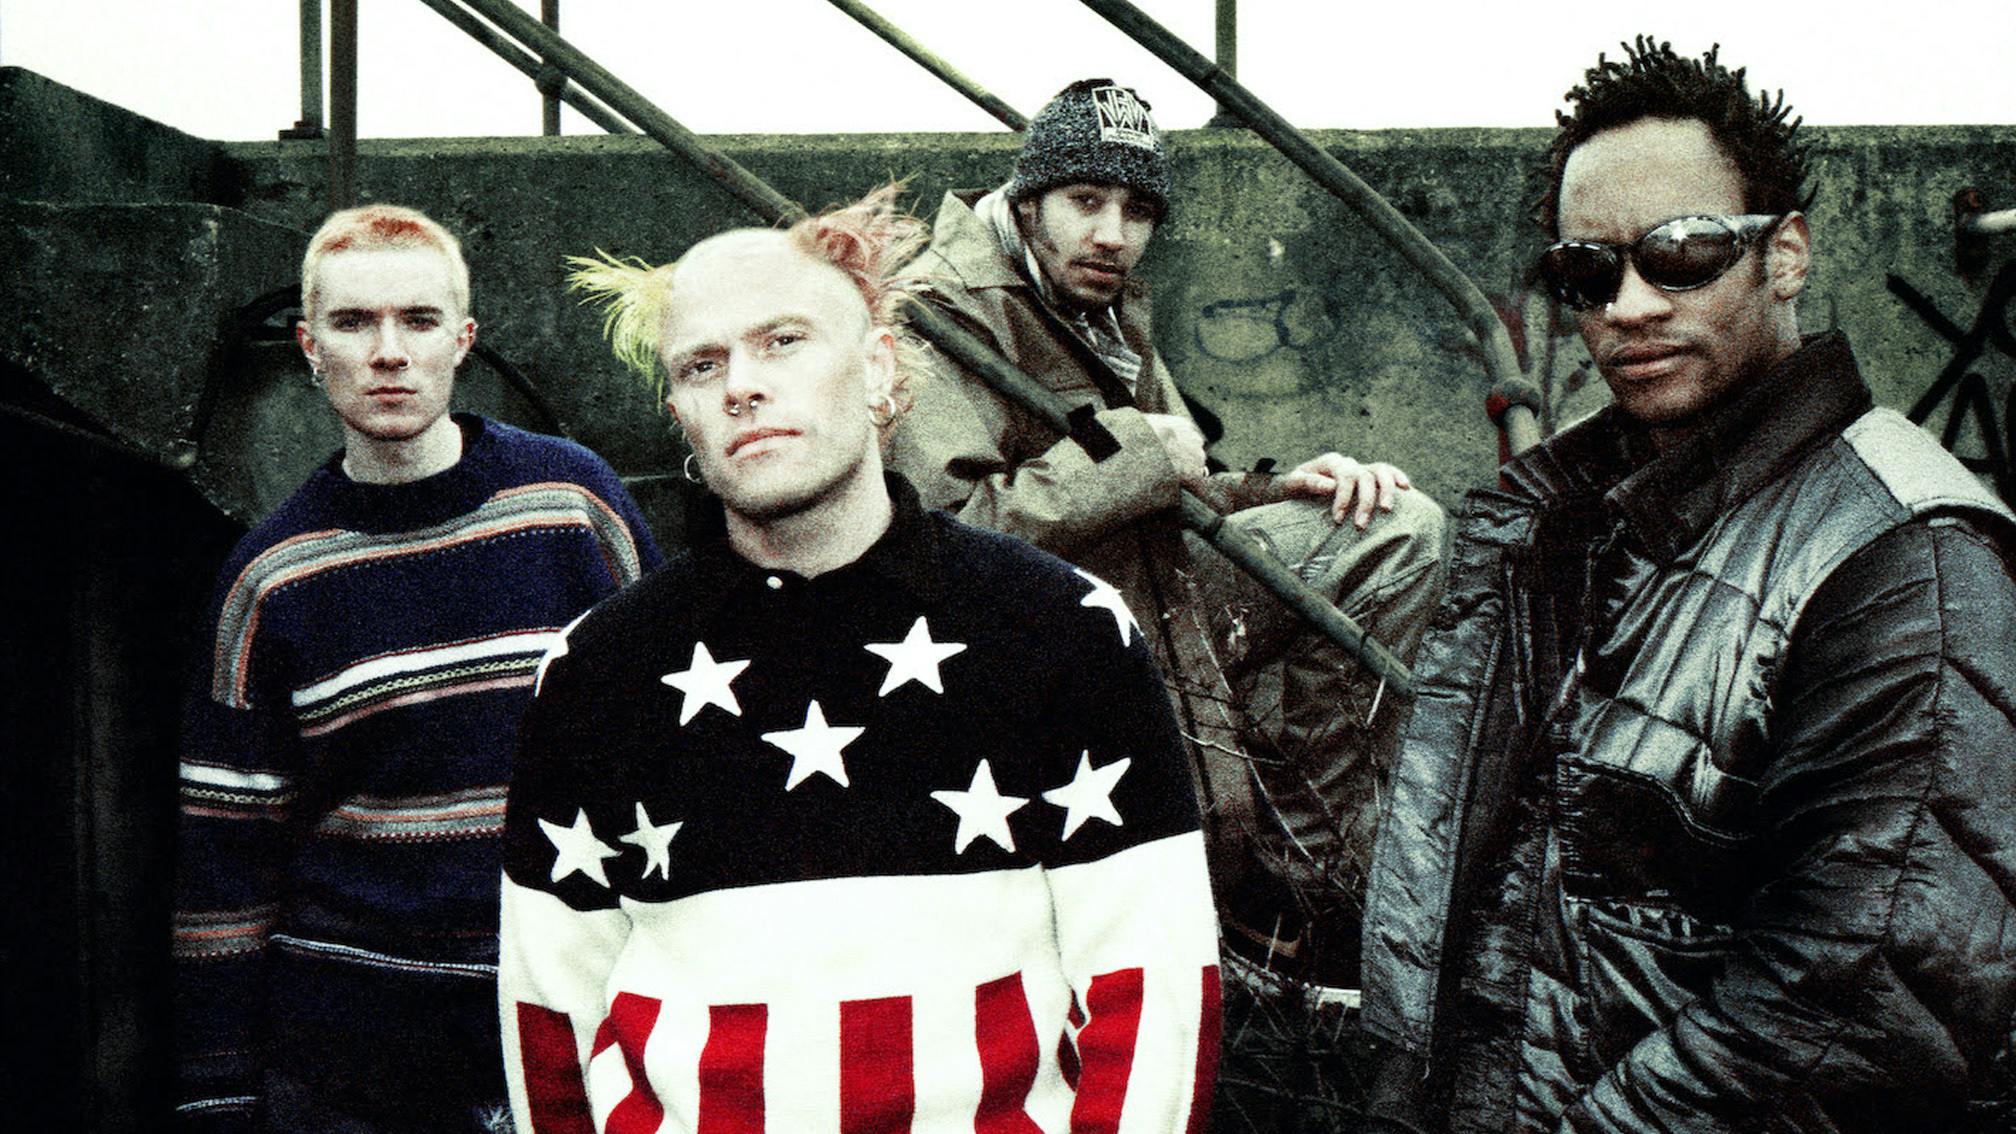 The Prodigy are making a documentary: "A story of brothers on a mission to make noise"